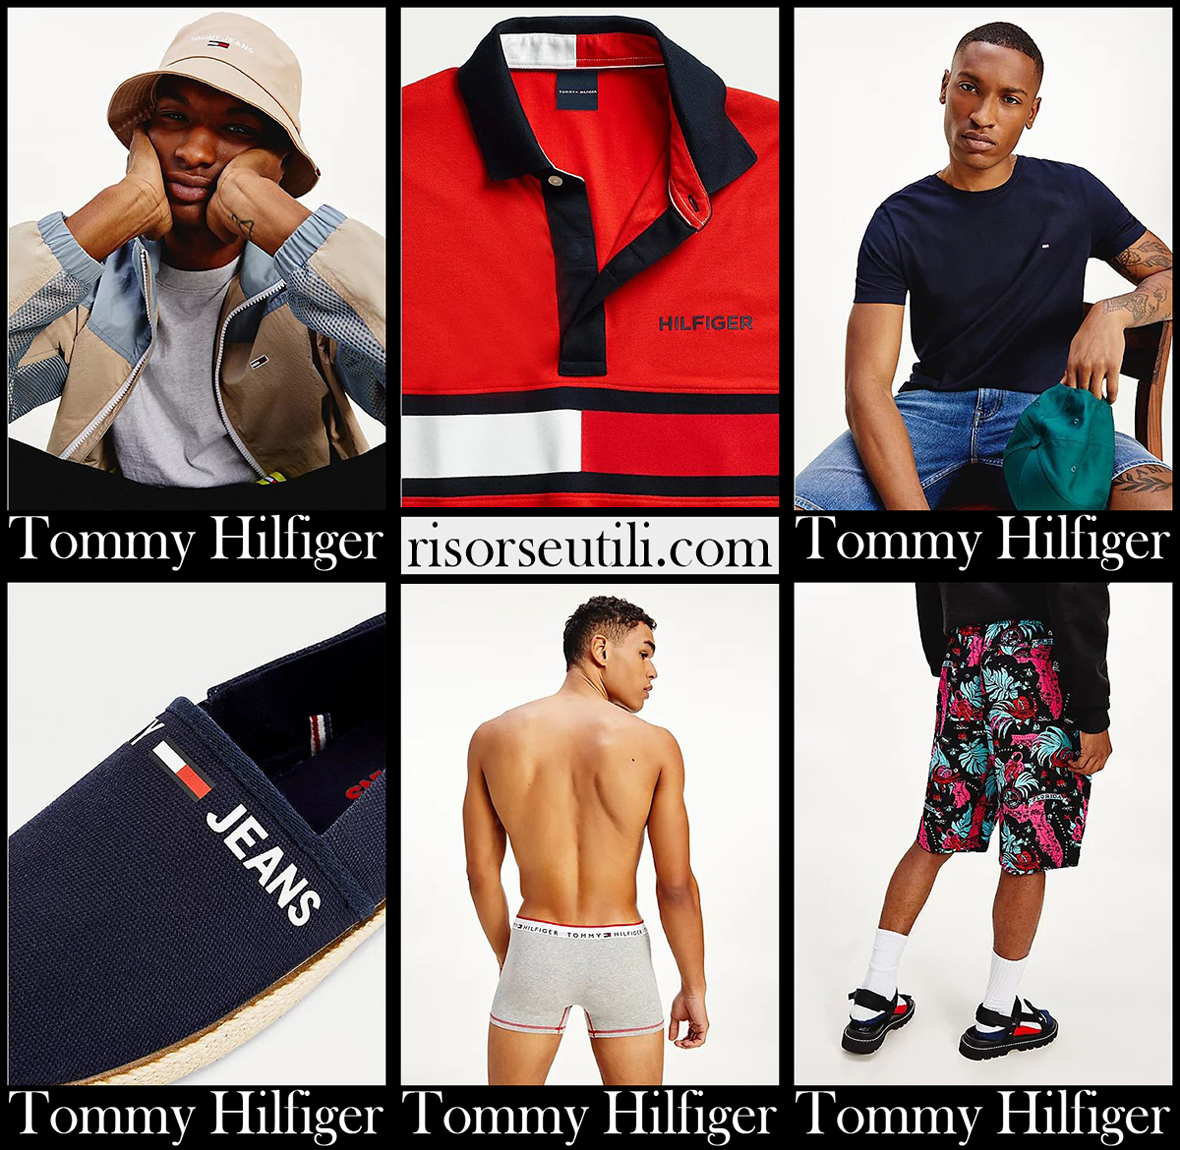 New arrivals Tommy Hilfiger 2021 mens clothing look